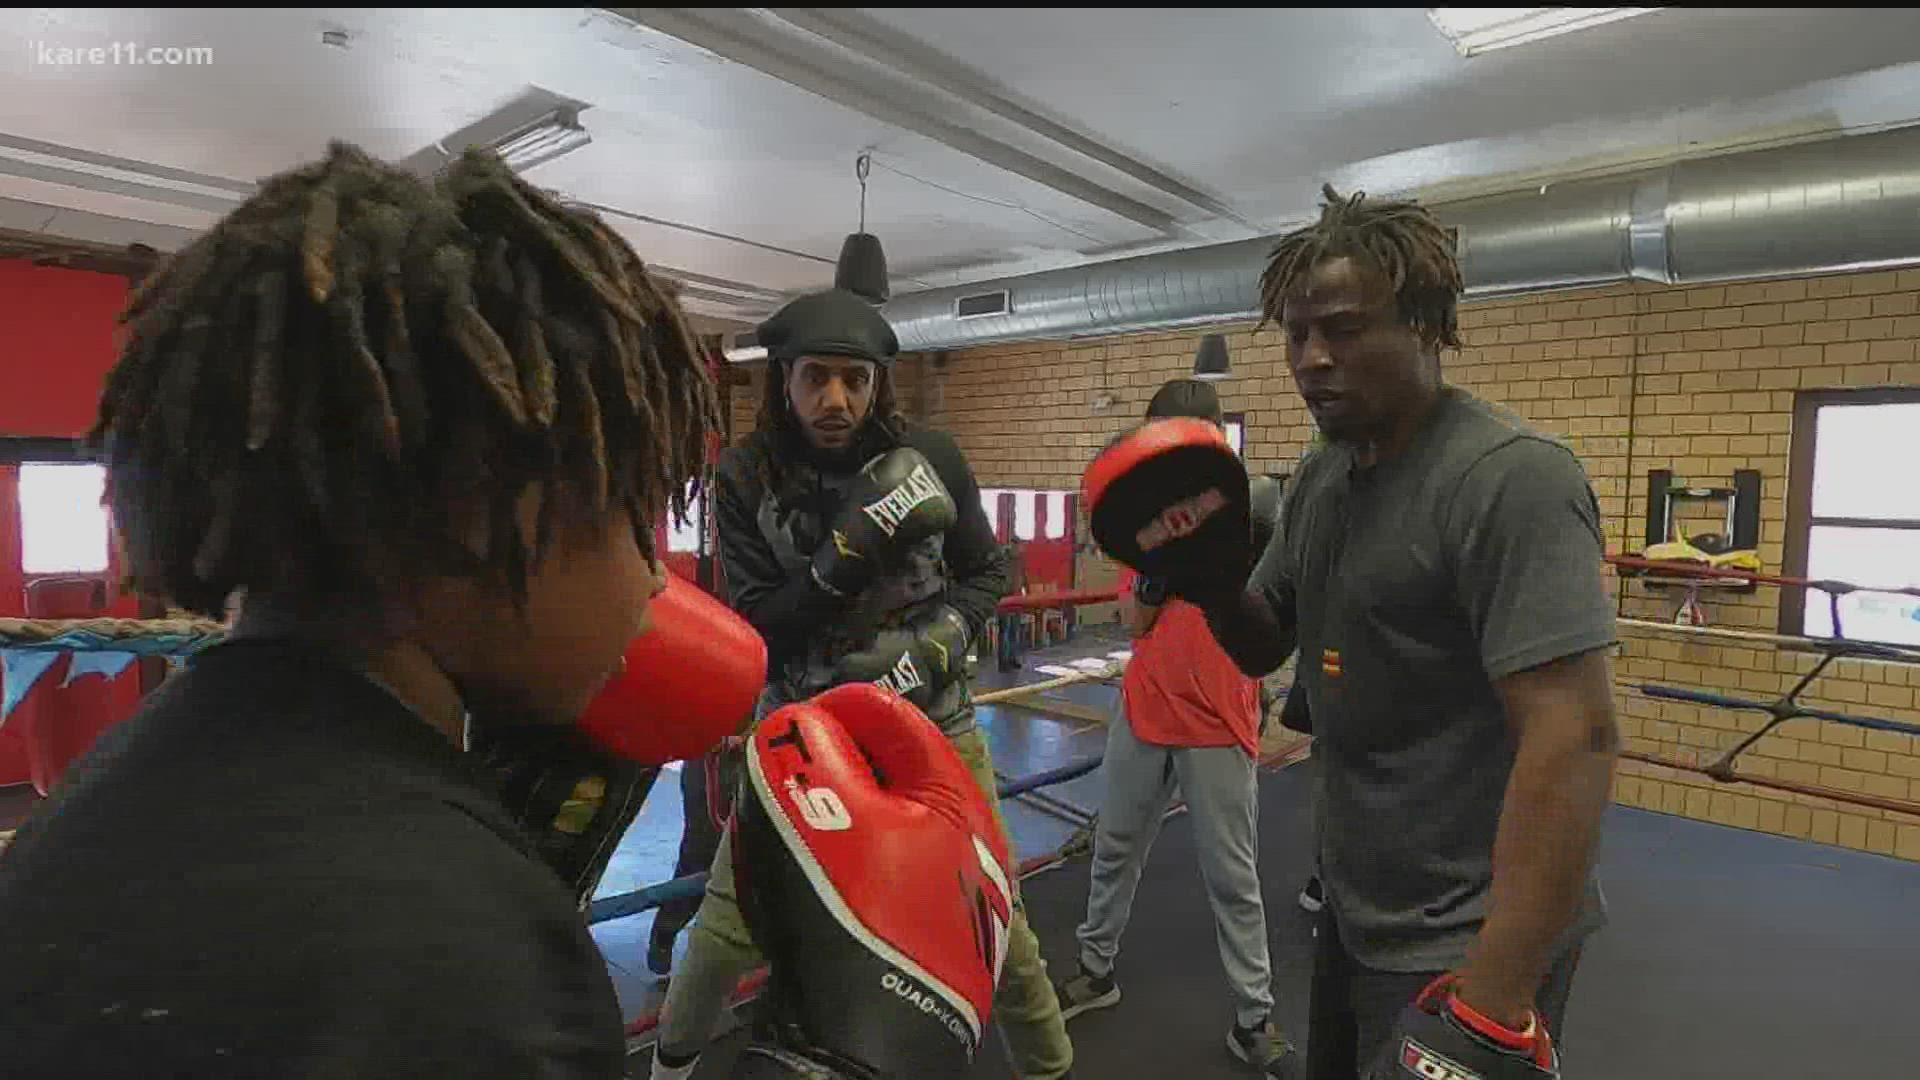 For six years now, Minneapolis kids have come in for boxing classes, on-site tutoring and a nutritious meal while learning life lessons and building character.